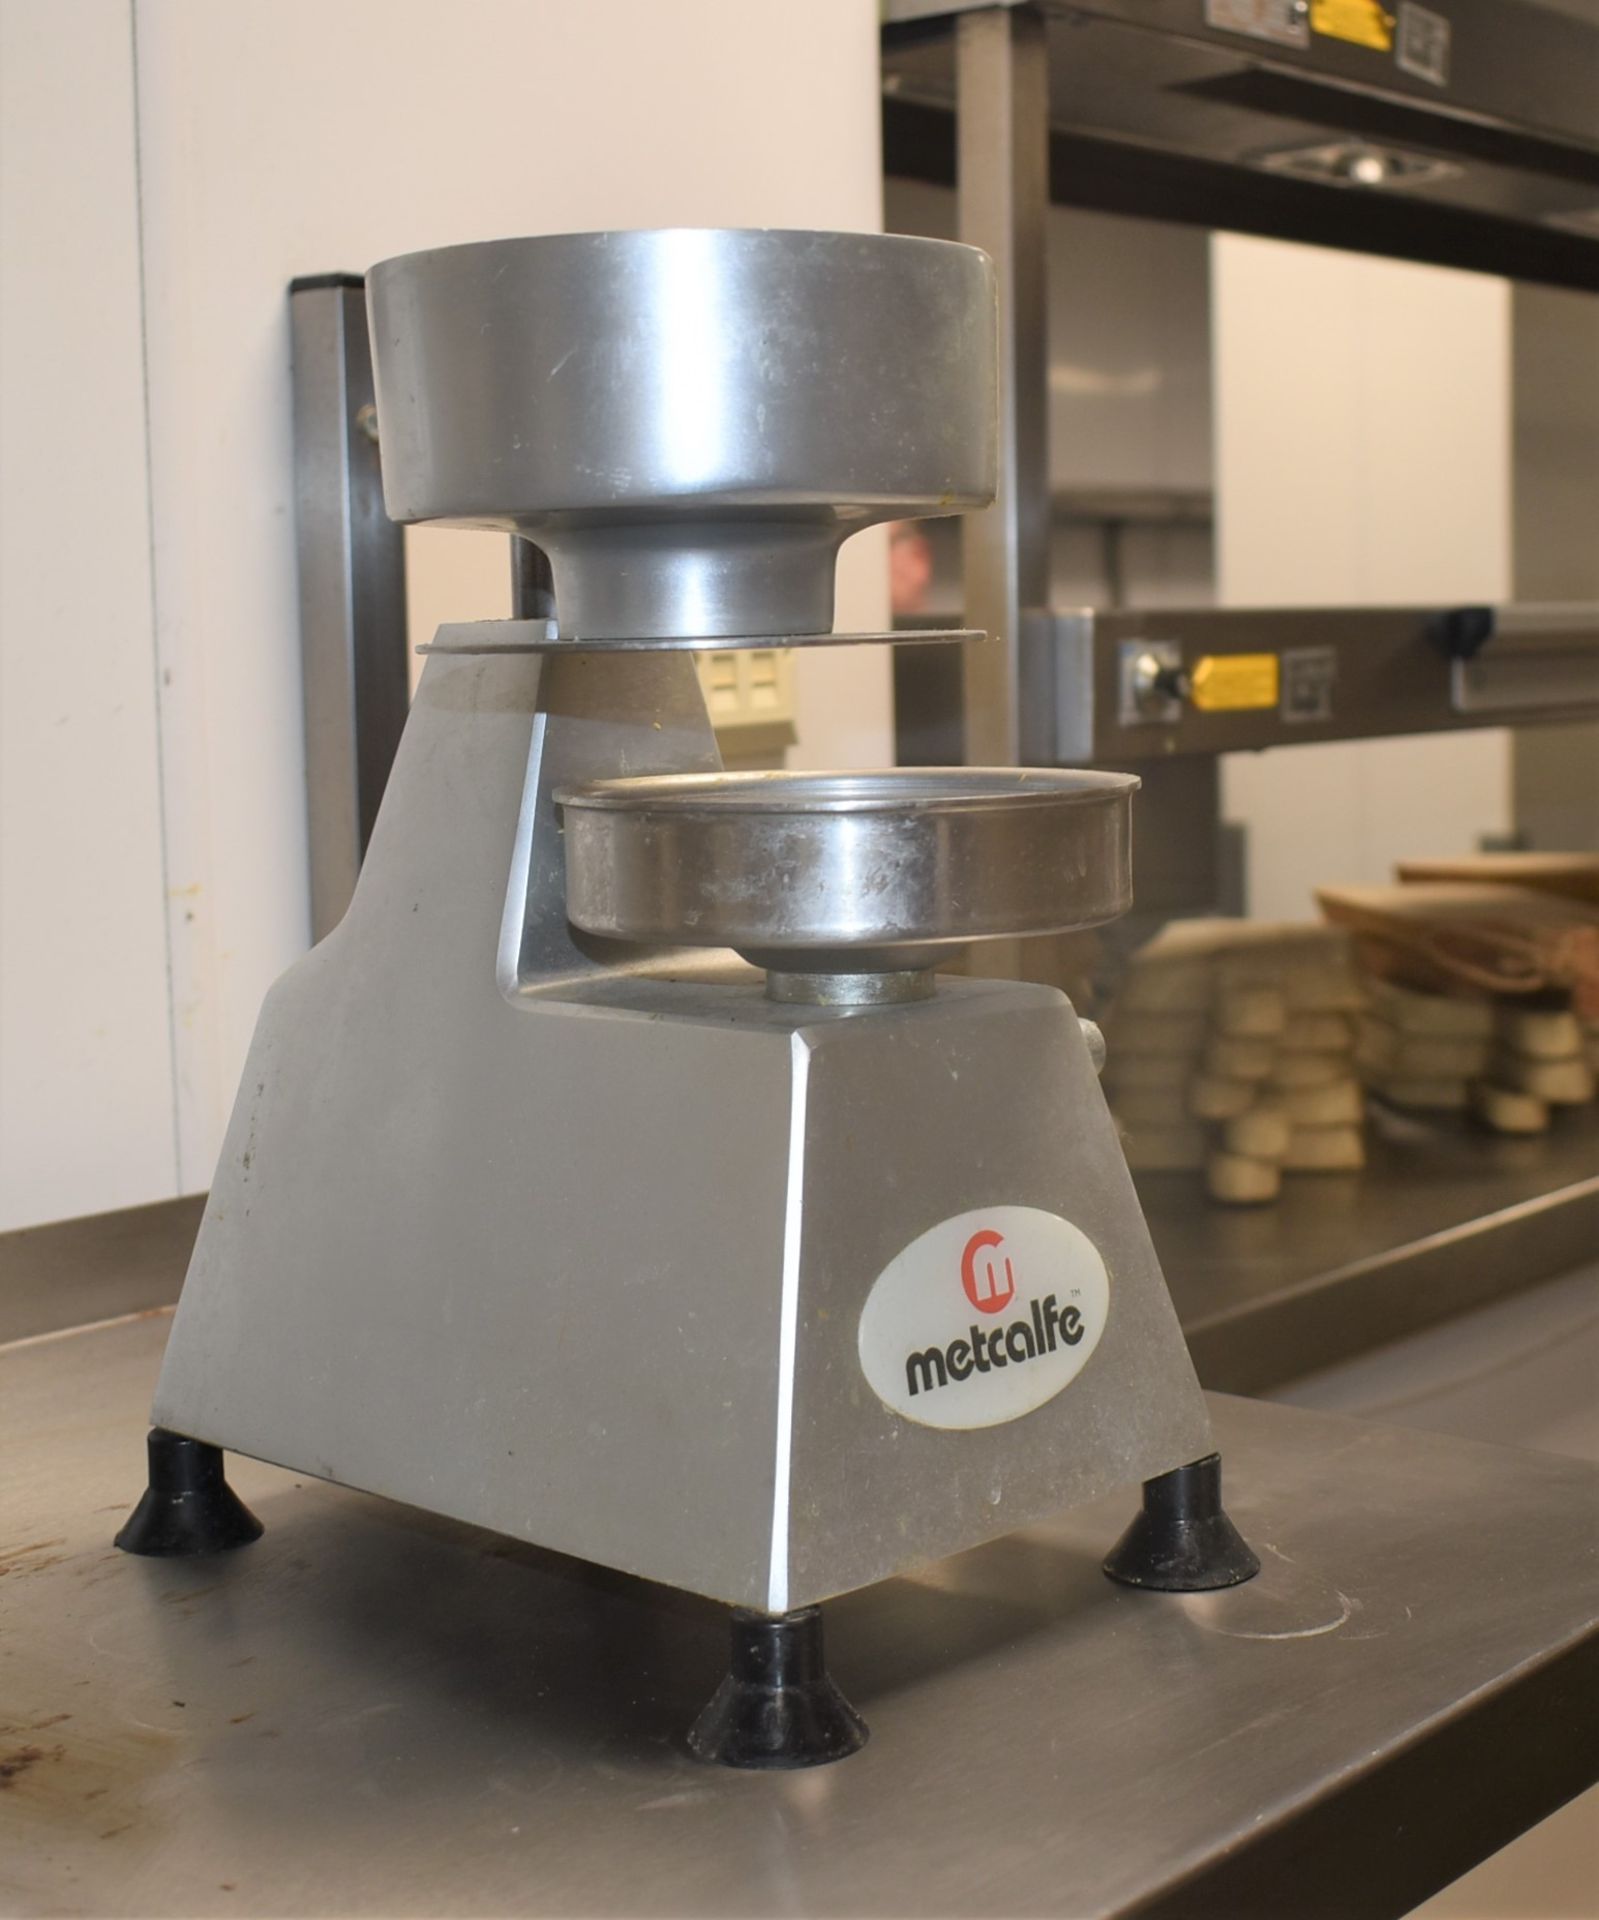 1 x Metcalfe Commercial Kitchen Countertop Appliance - As Shown in The Pictures Provided